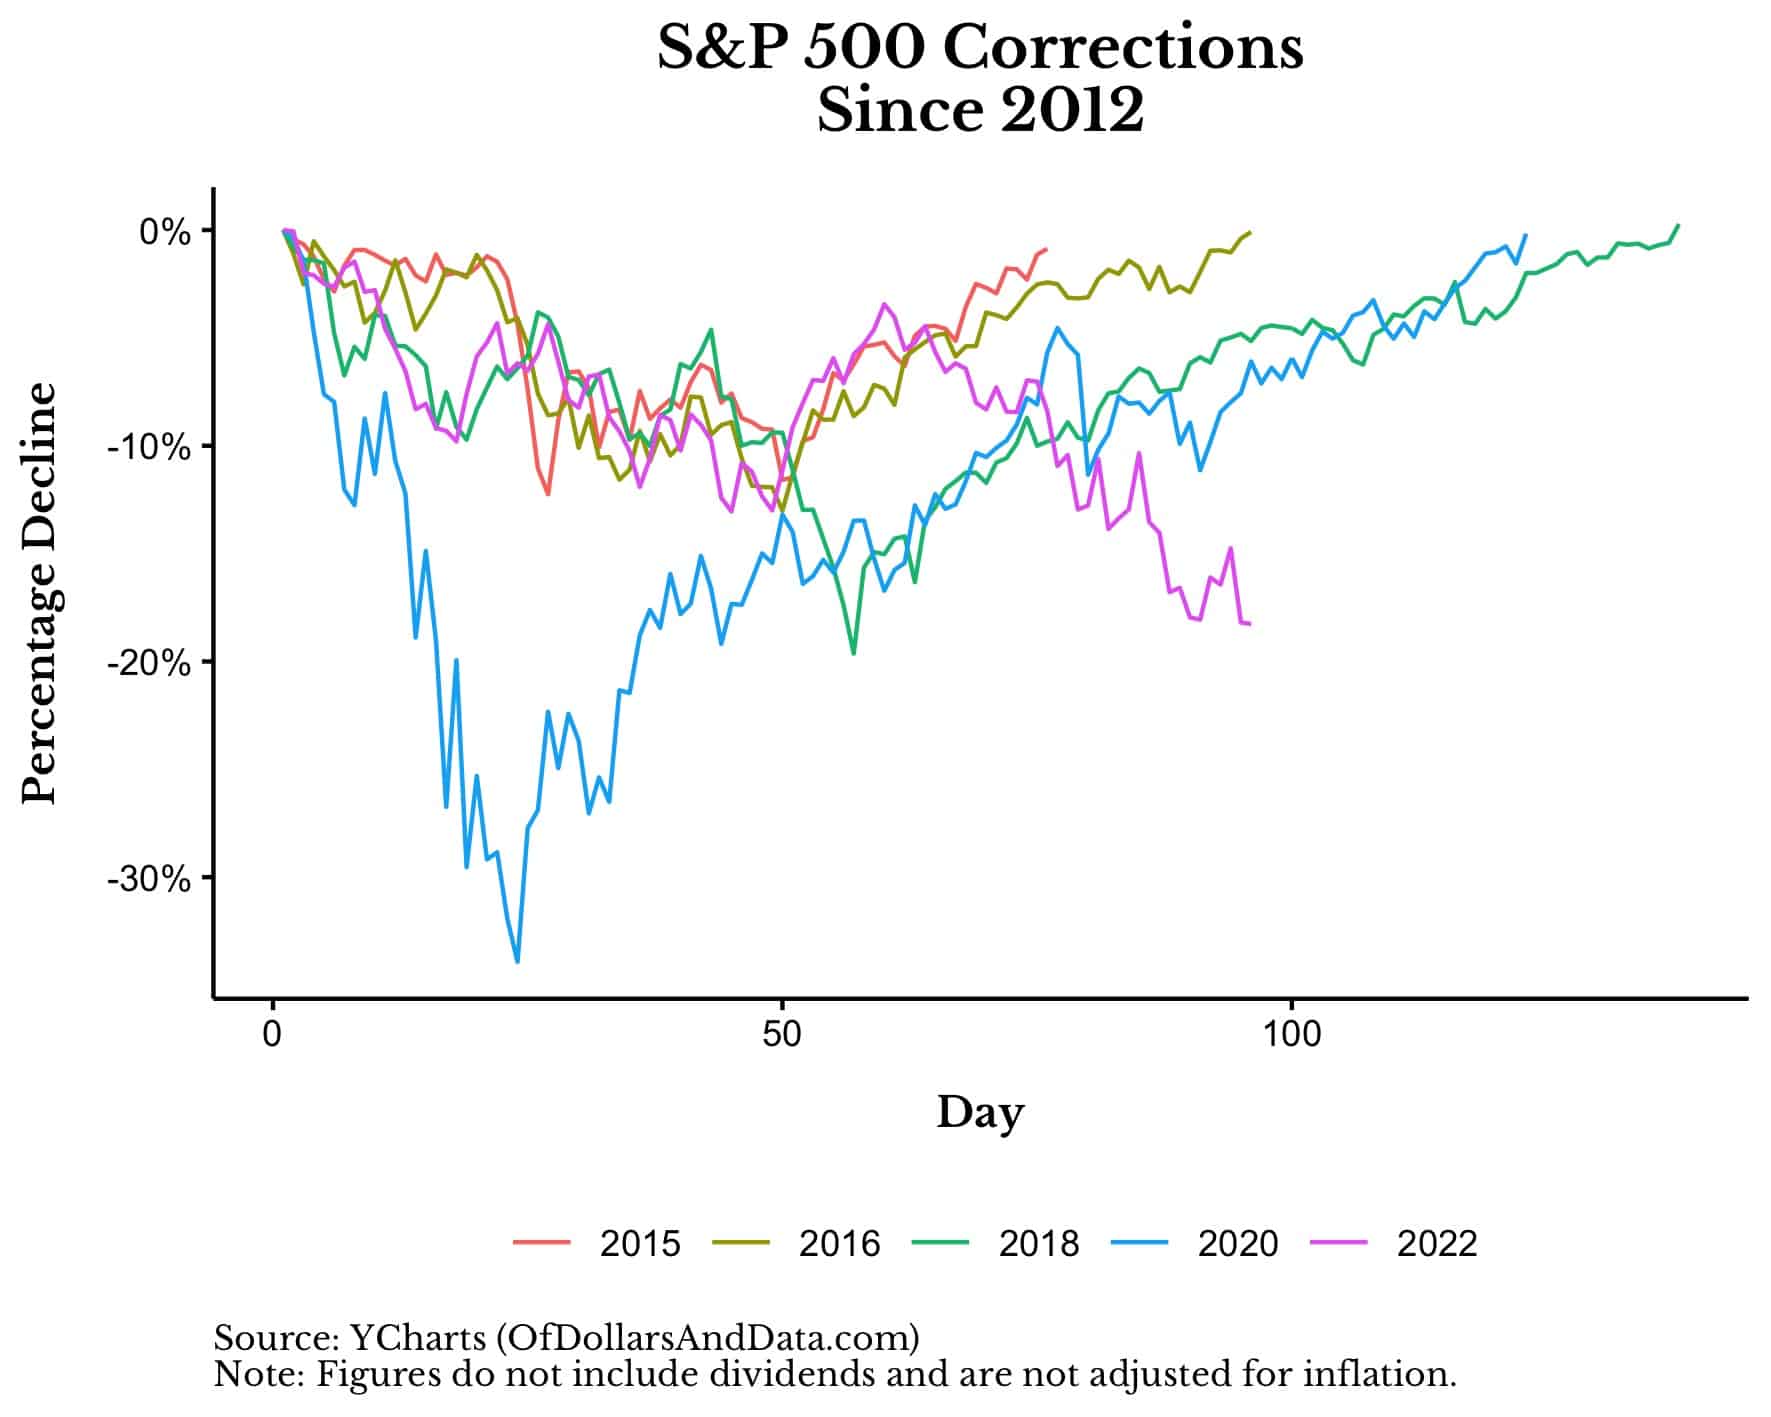 S&P 500 corrections since 2012 overlayed.